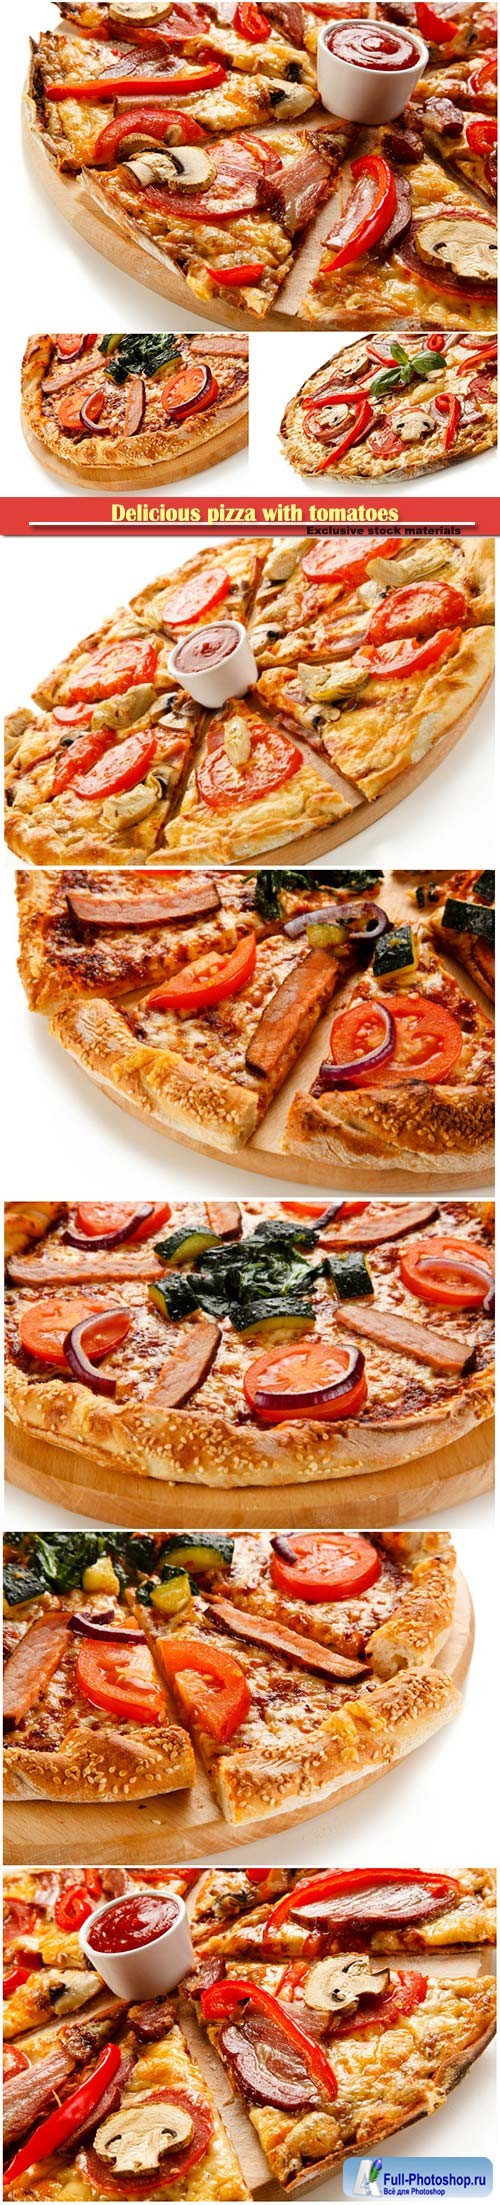 Delicious pizza with tomatoes, peppers and mushrooms